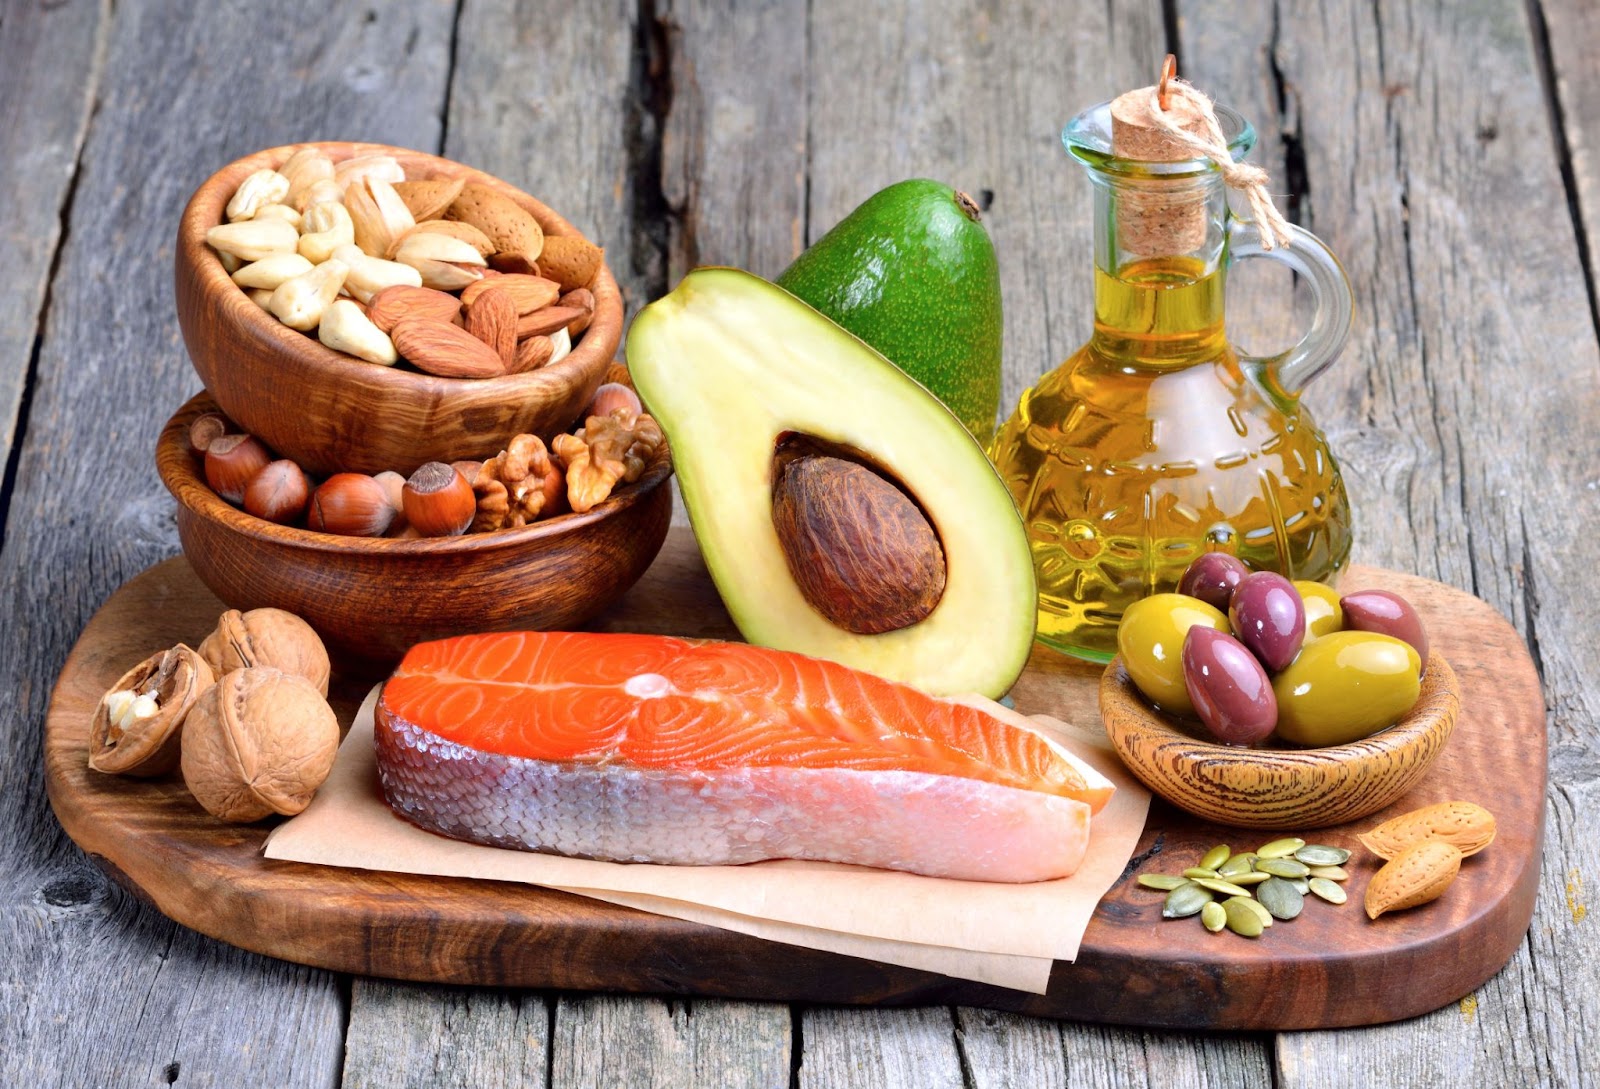 Wooden Board with foods high in healthy fats- salmon, avocado, olives, nuts